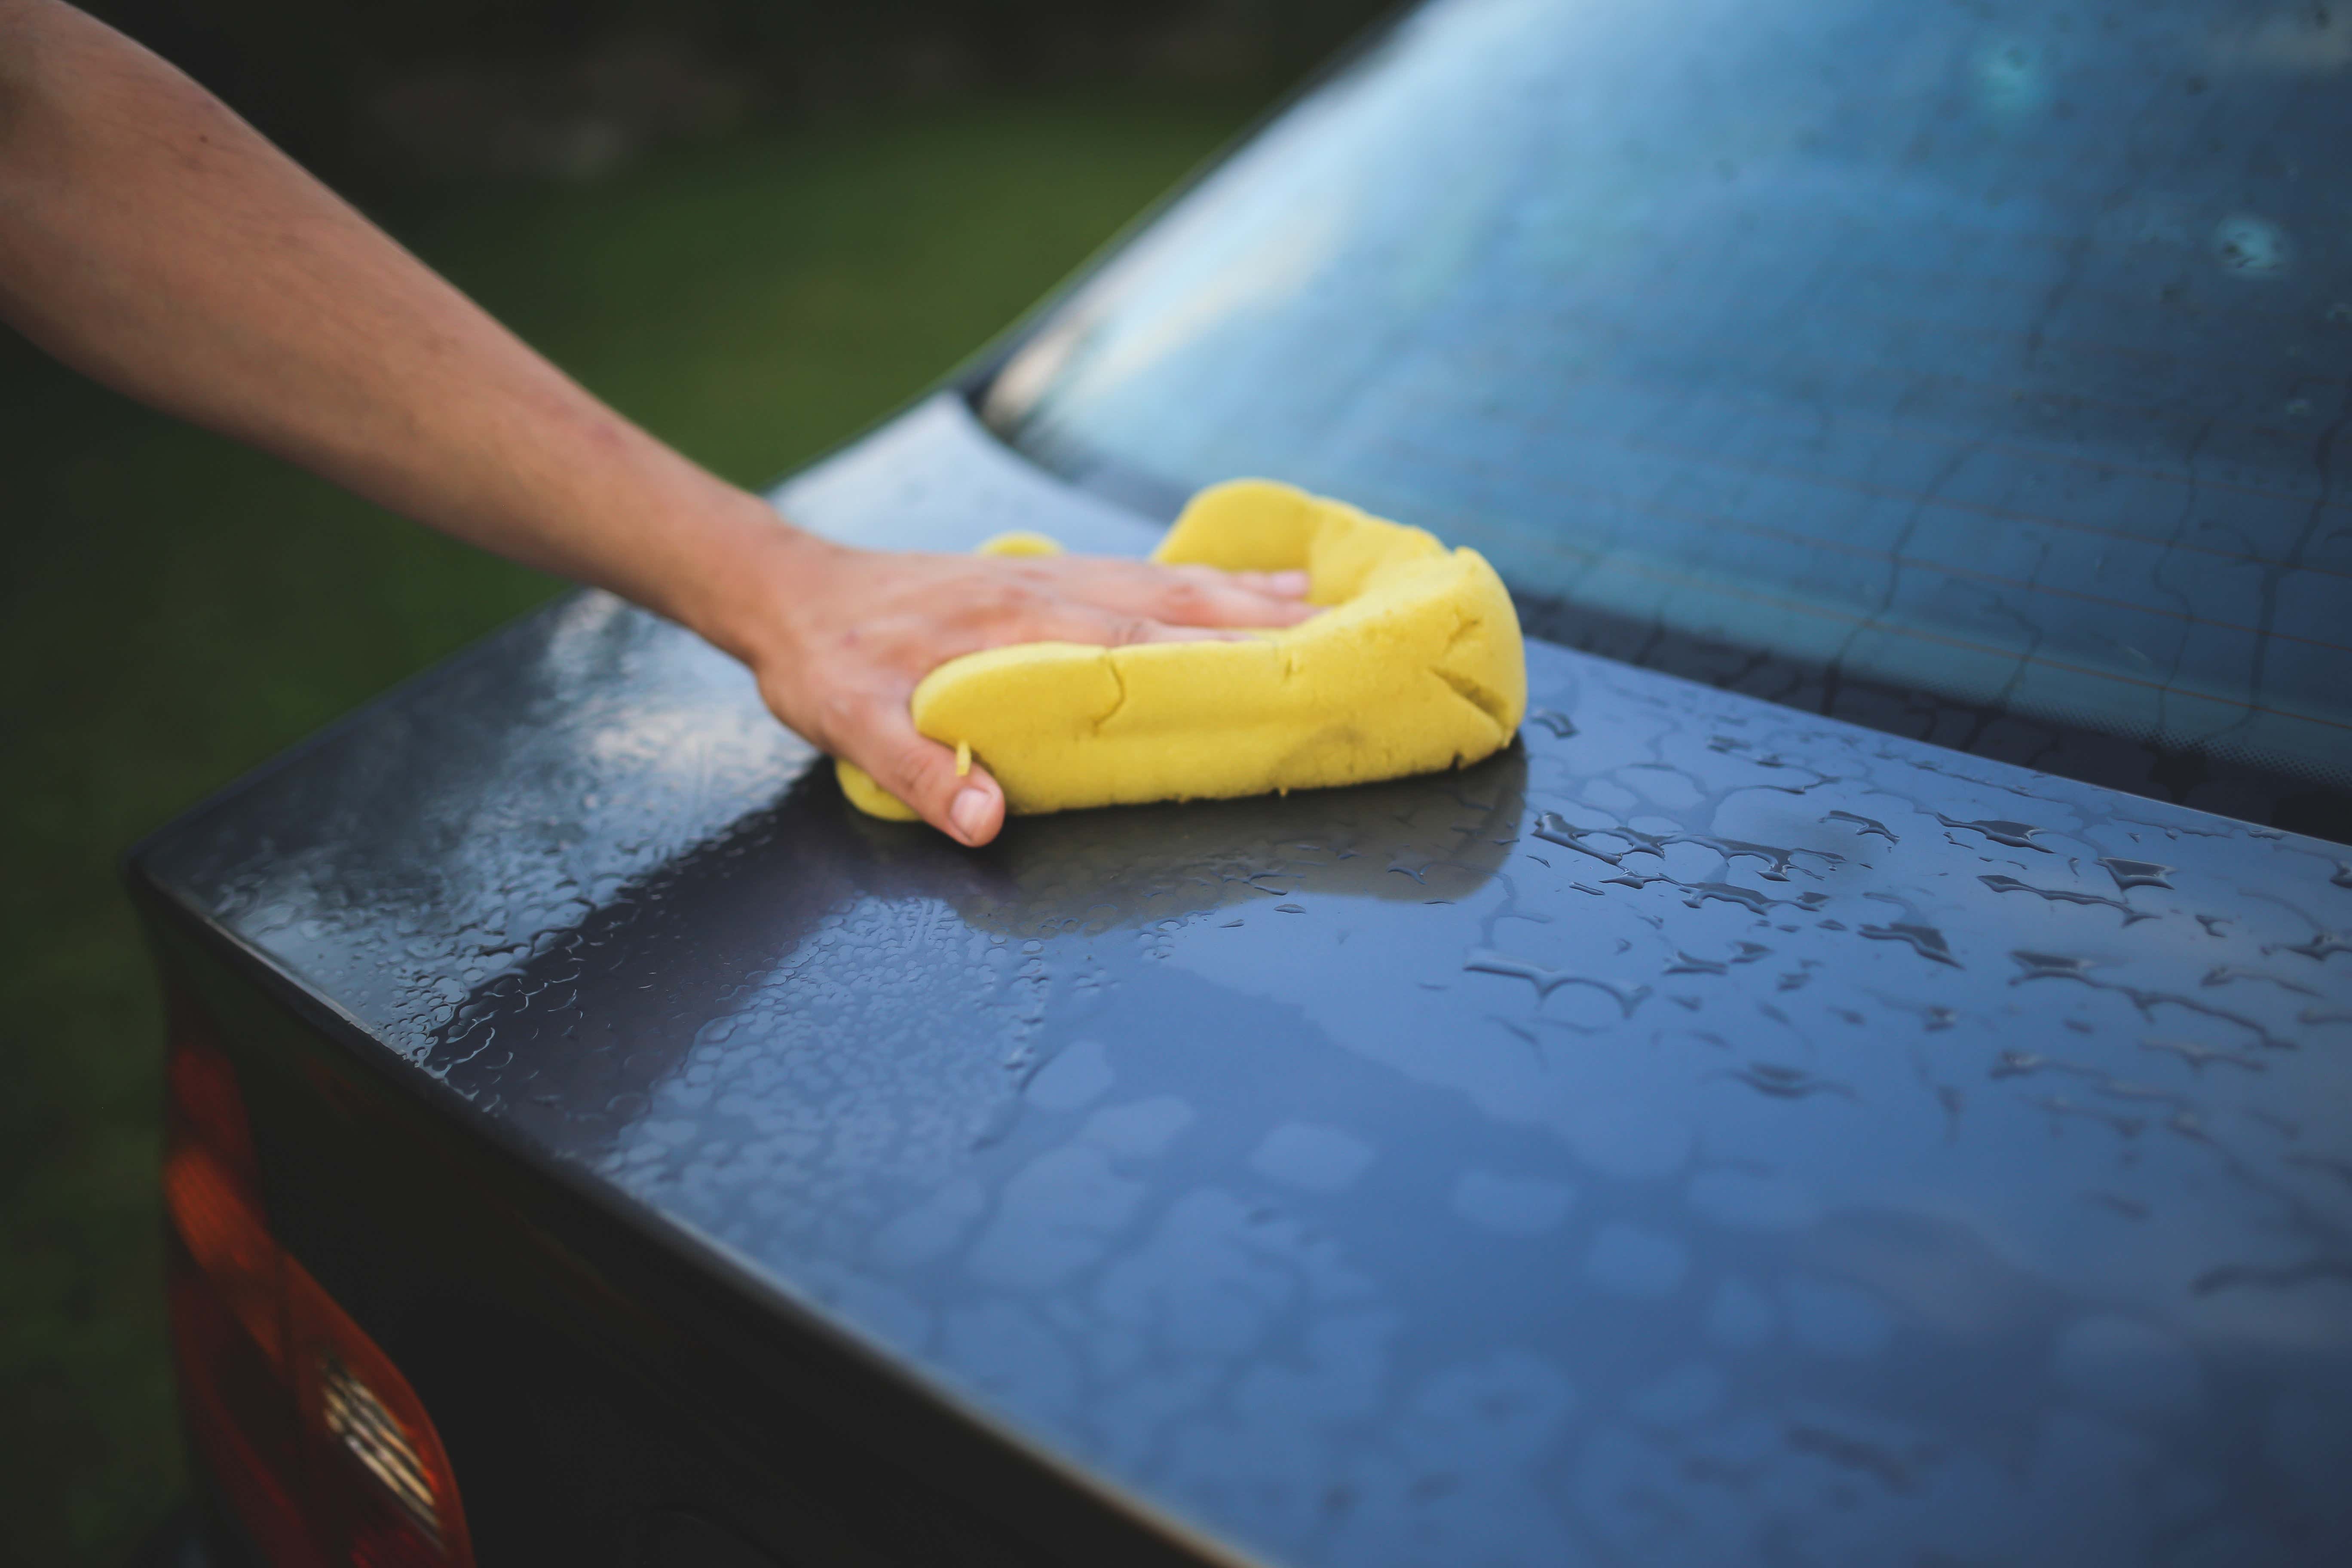 Washing a blue car with a yellow sponge